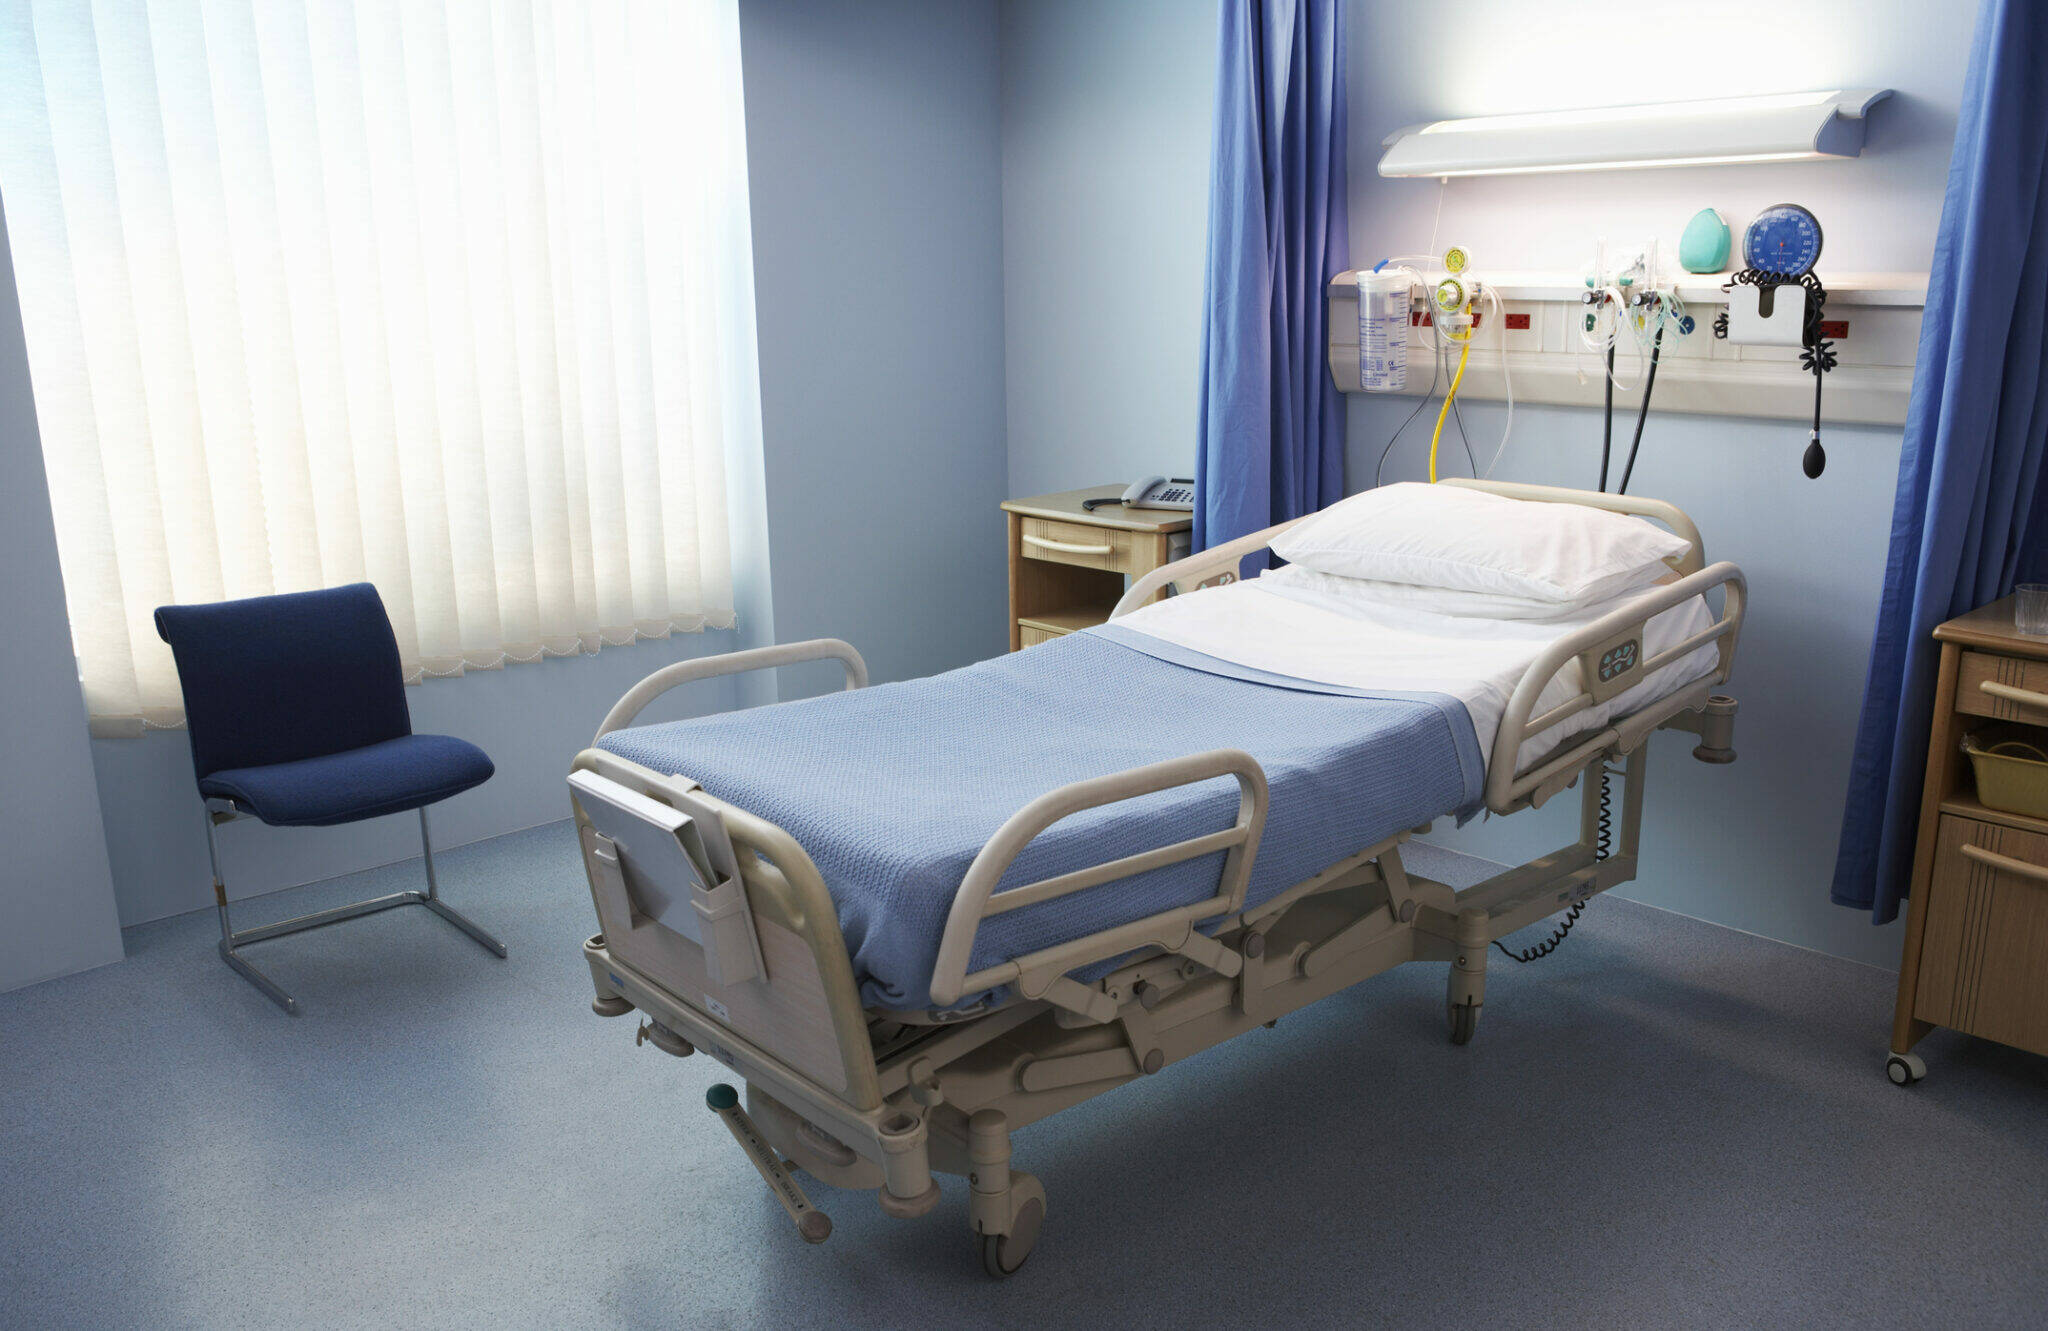 An empty hospital bed in a ward. (Photo by Flying Colours Ltd/Getty Images)